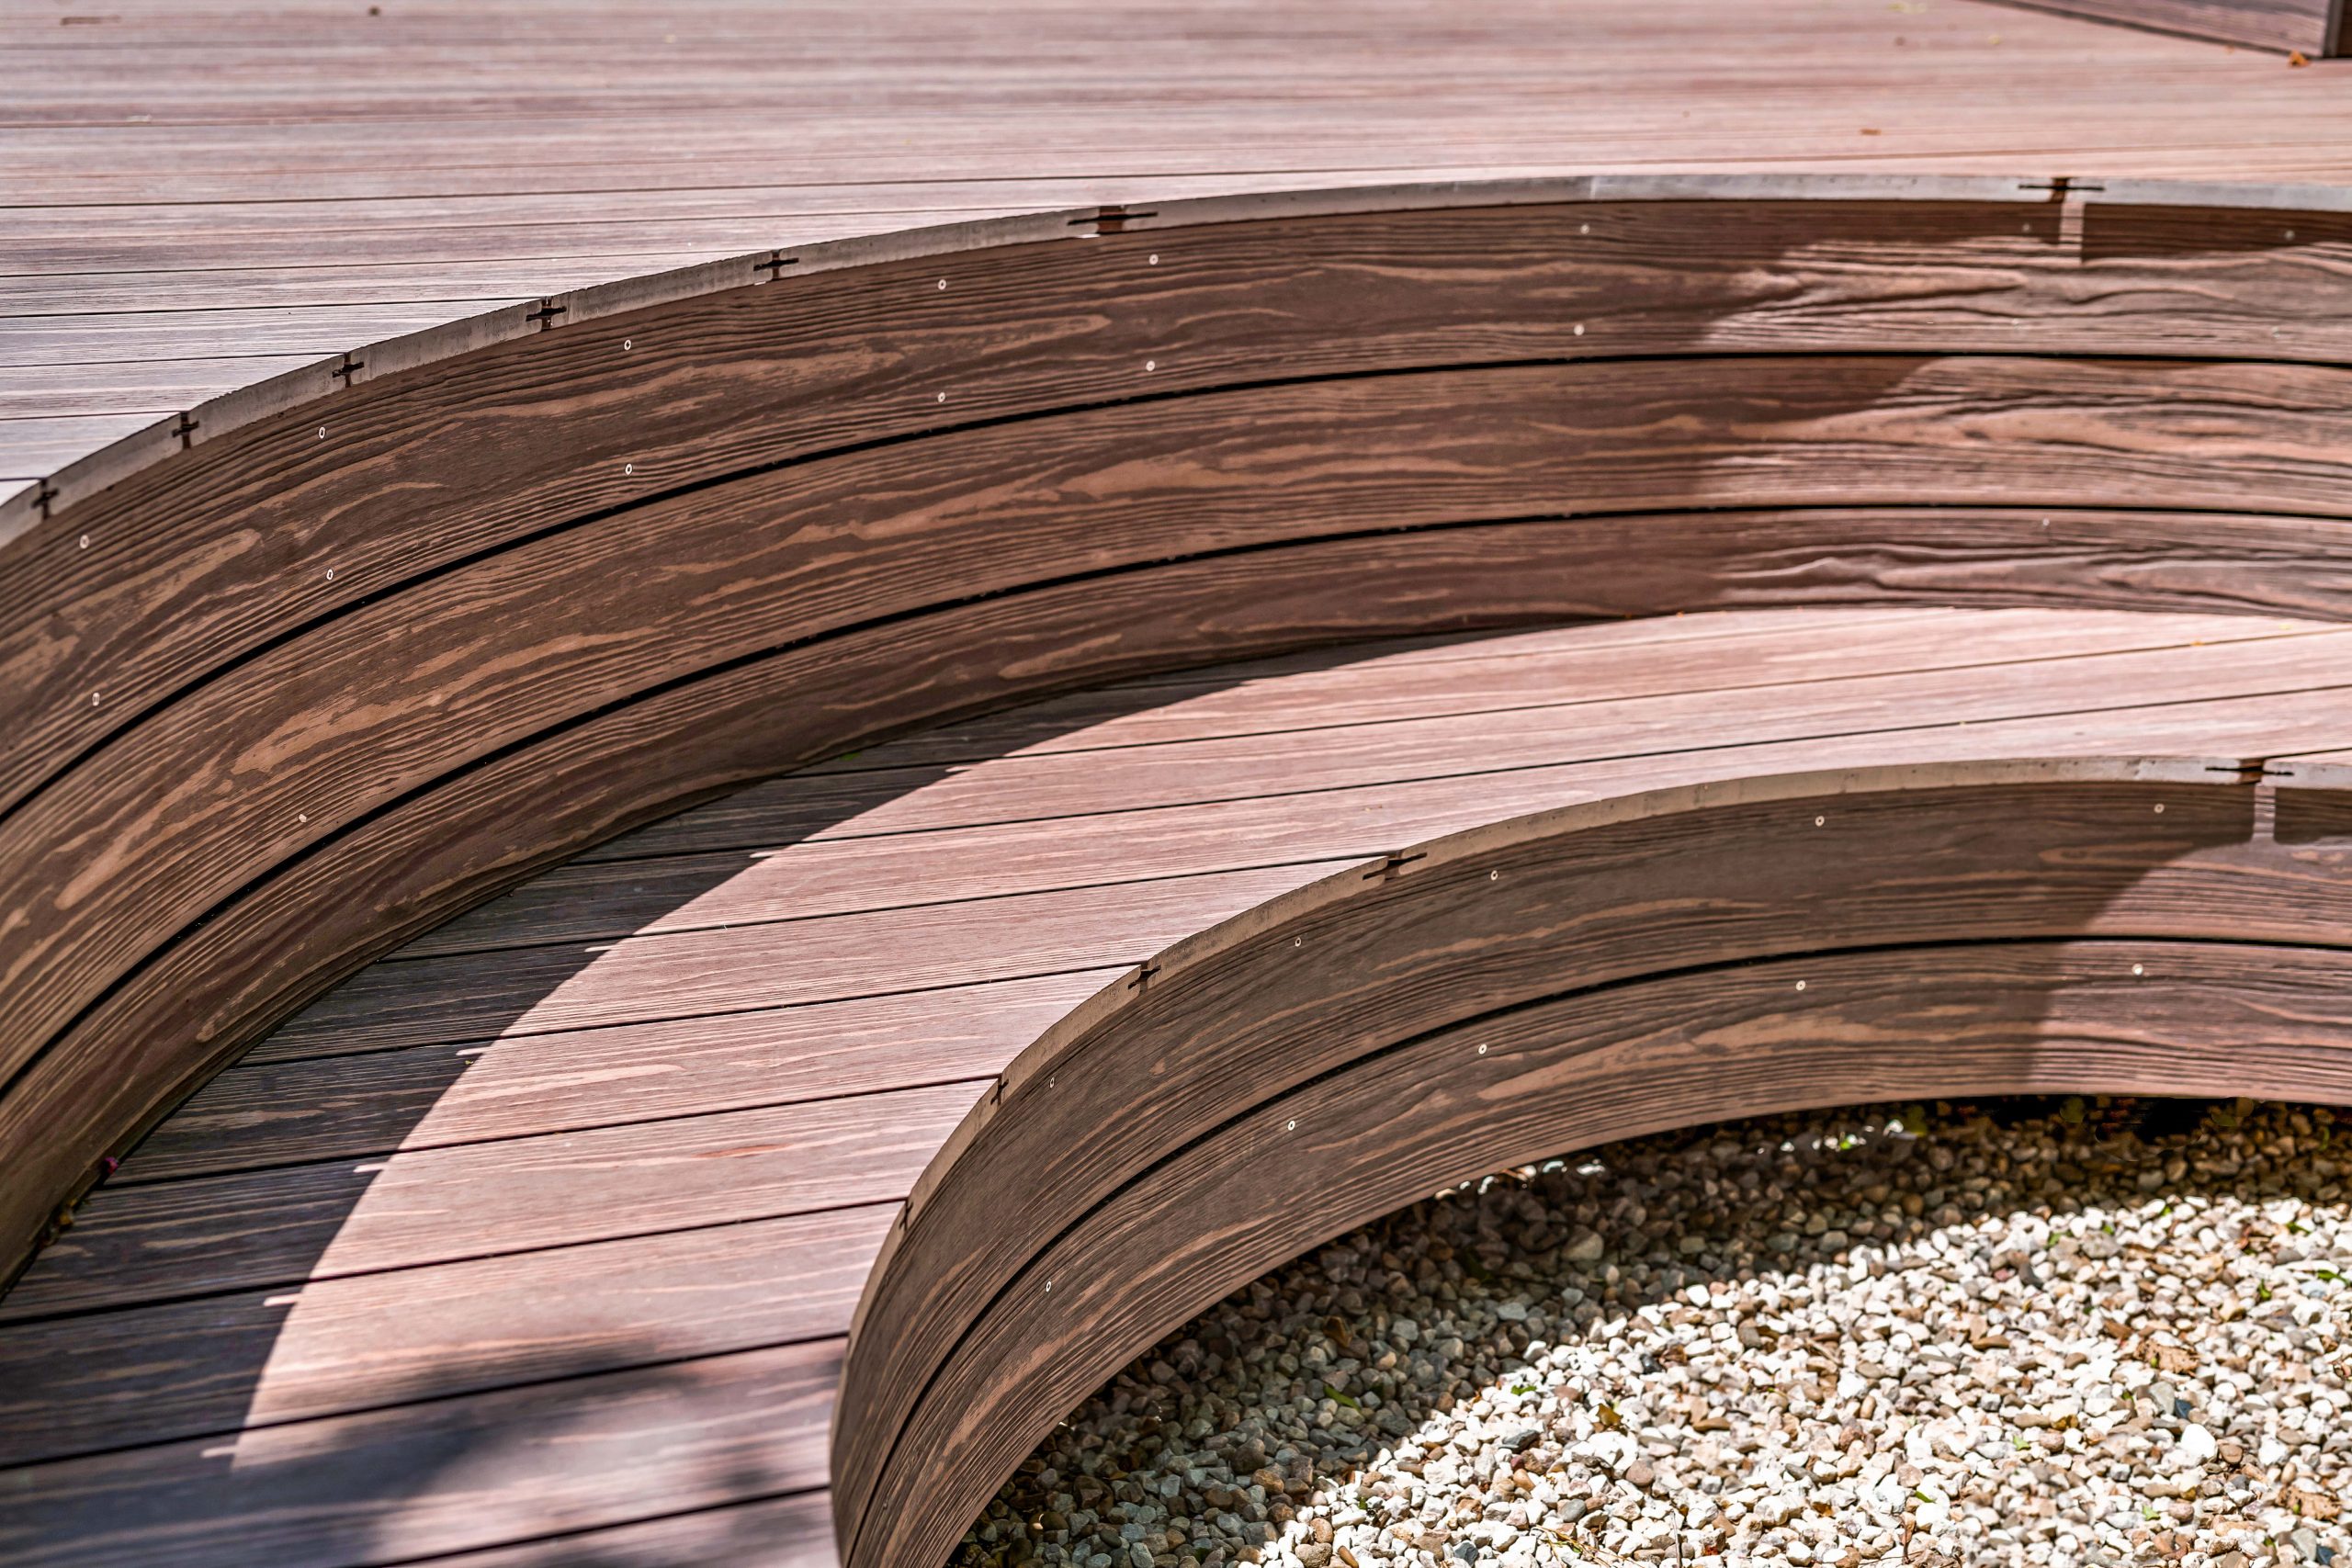 Outdoor composite deck seating in C-shape amphitheater style